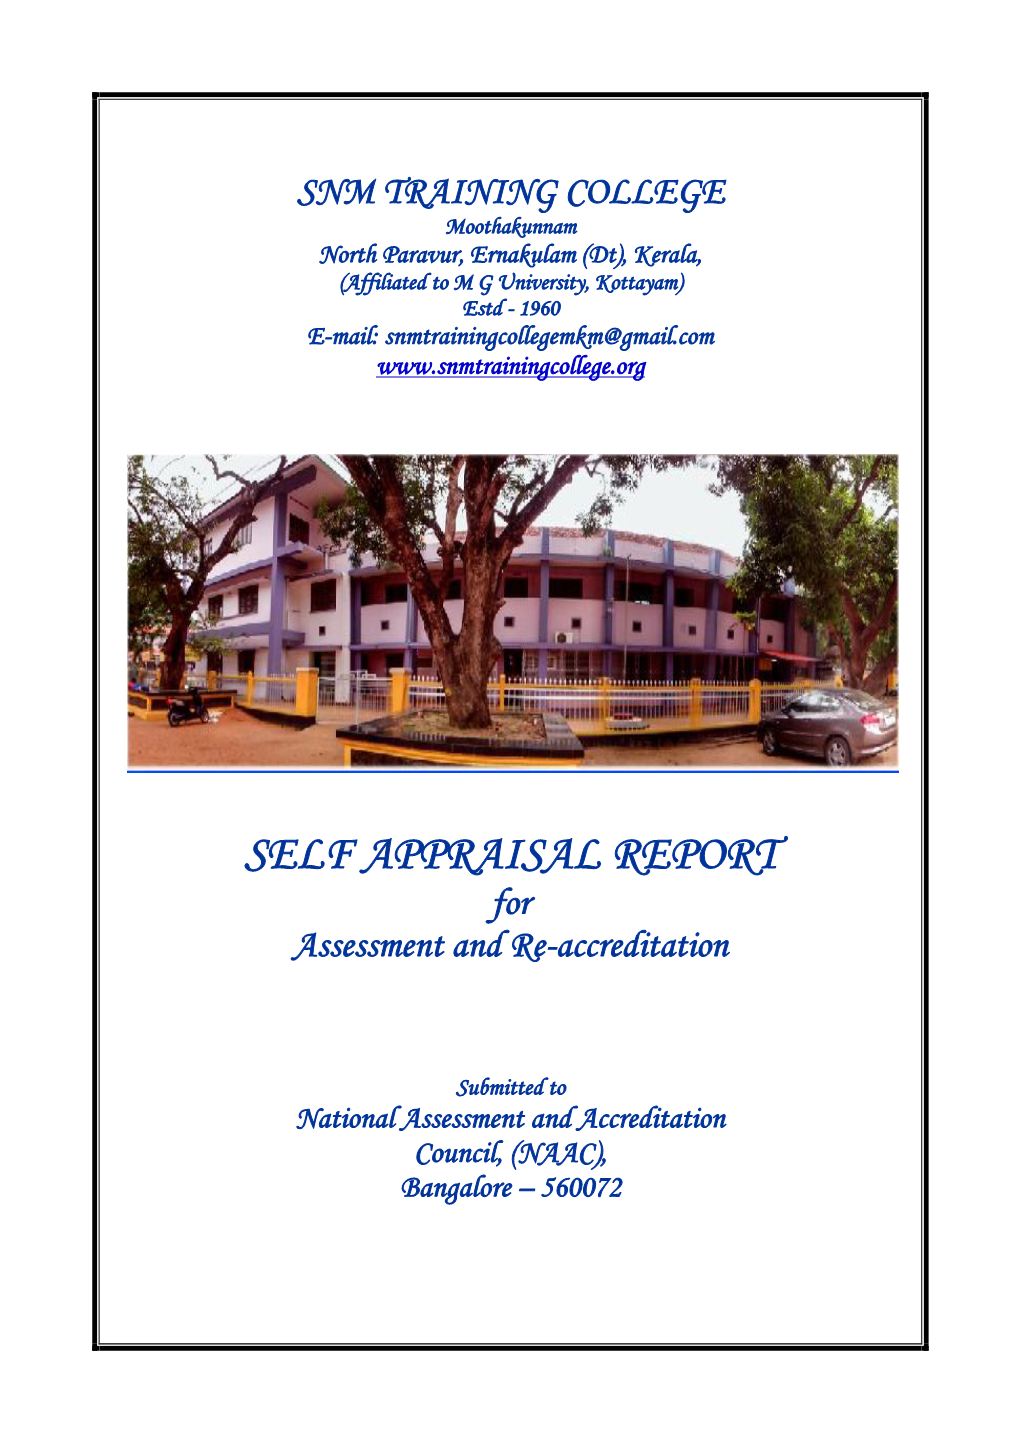 SELF APPRAISAL REPORT for Assessment and Re-Accreditation